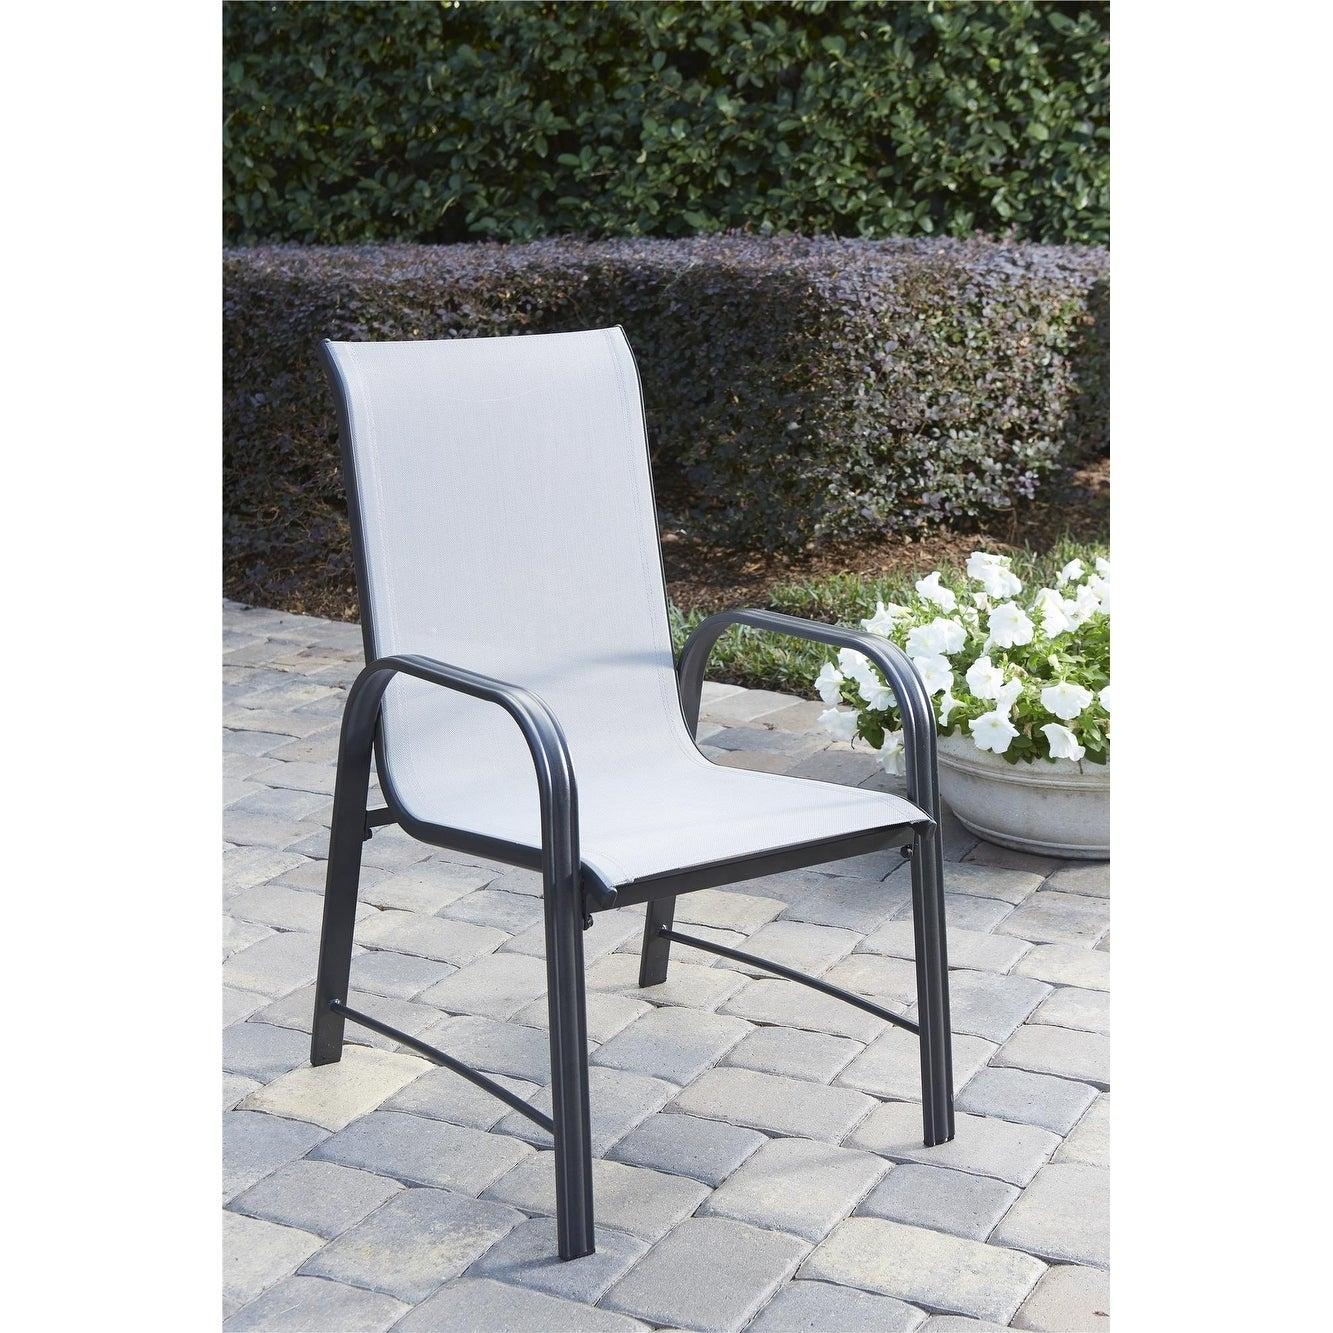 Cosco Outdoor Living Steel Patio Dining Chairs 6 Pack with regard to measurements 1333 X 1333